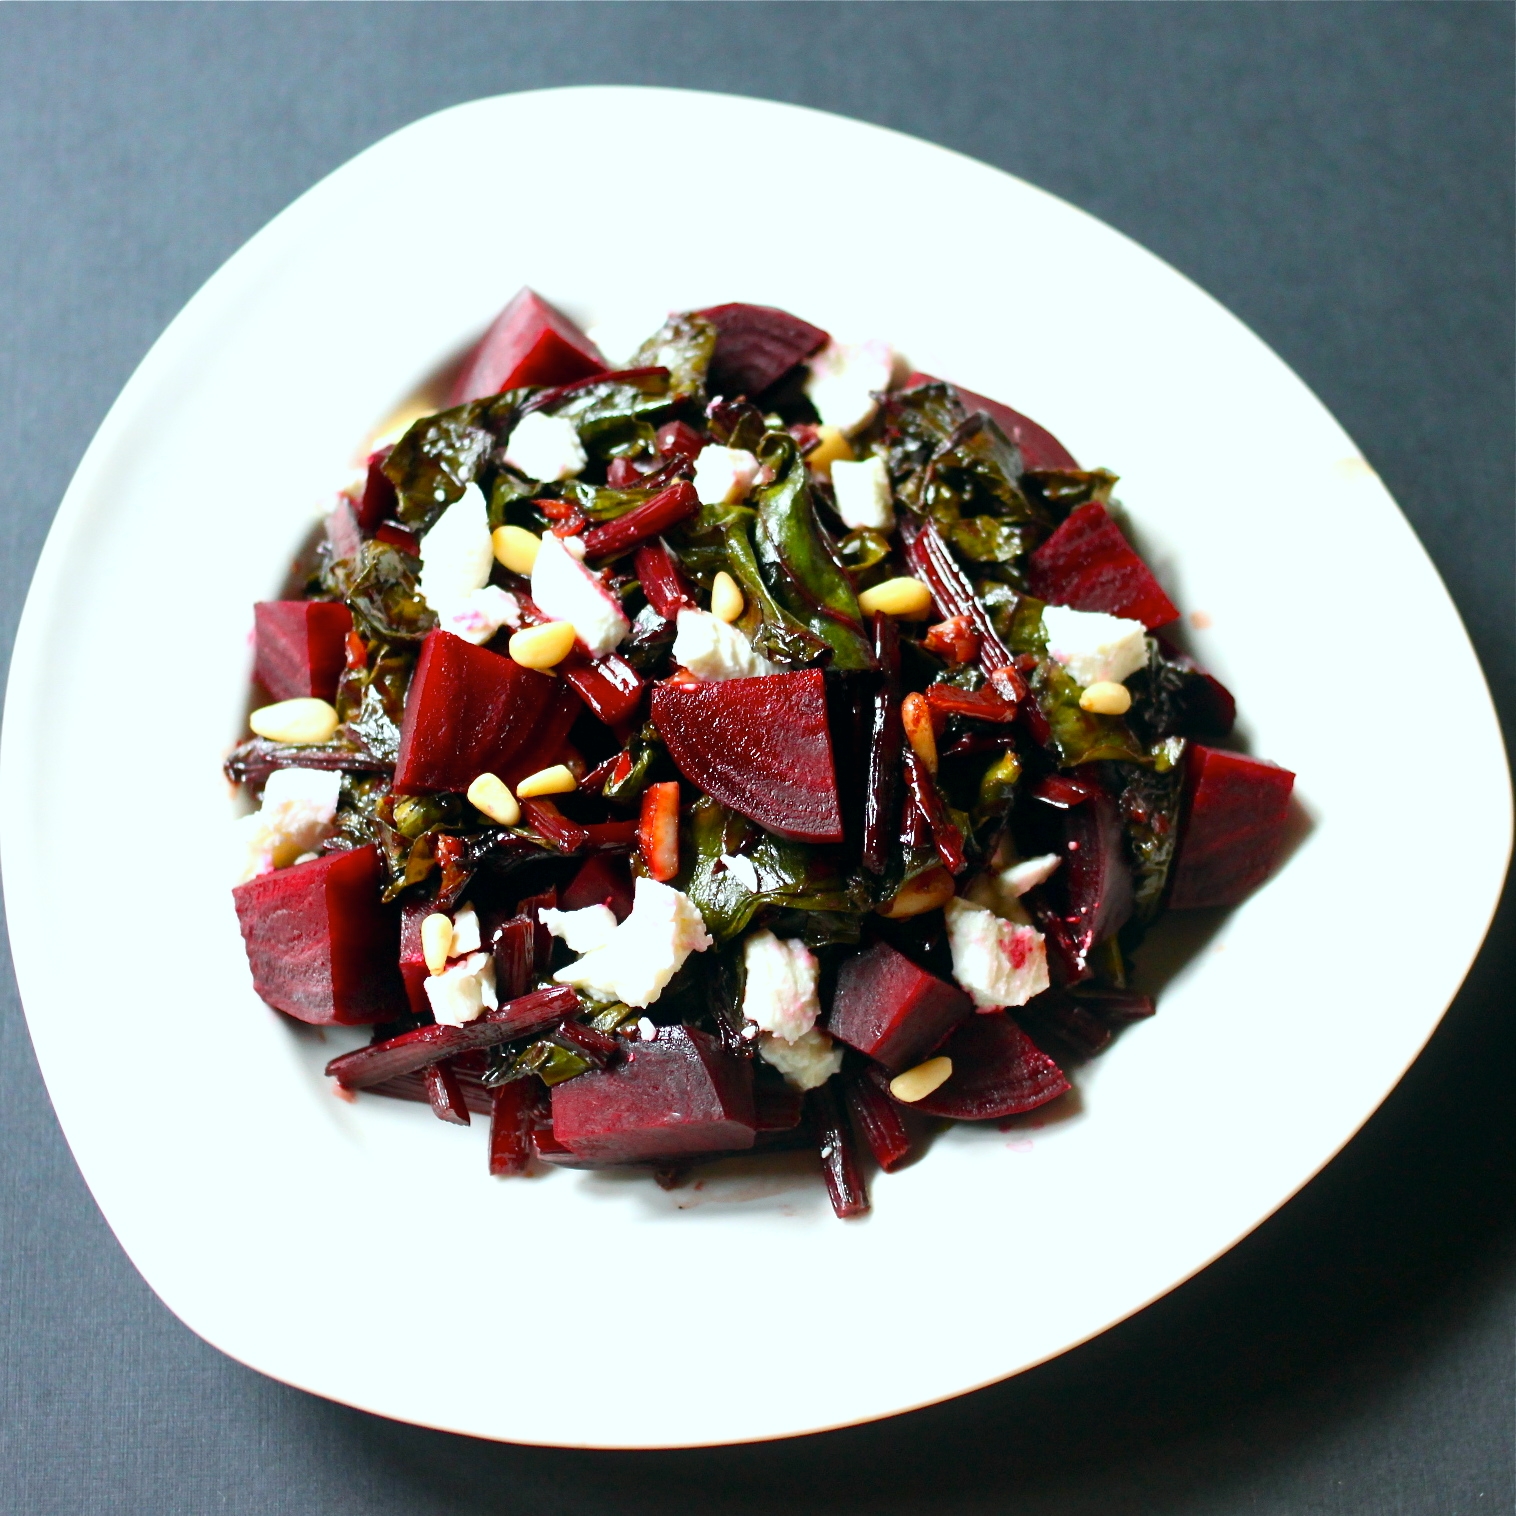 Warm Beet Green Salad with Beets, Goat Cheese, and Pine Nuts